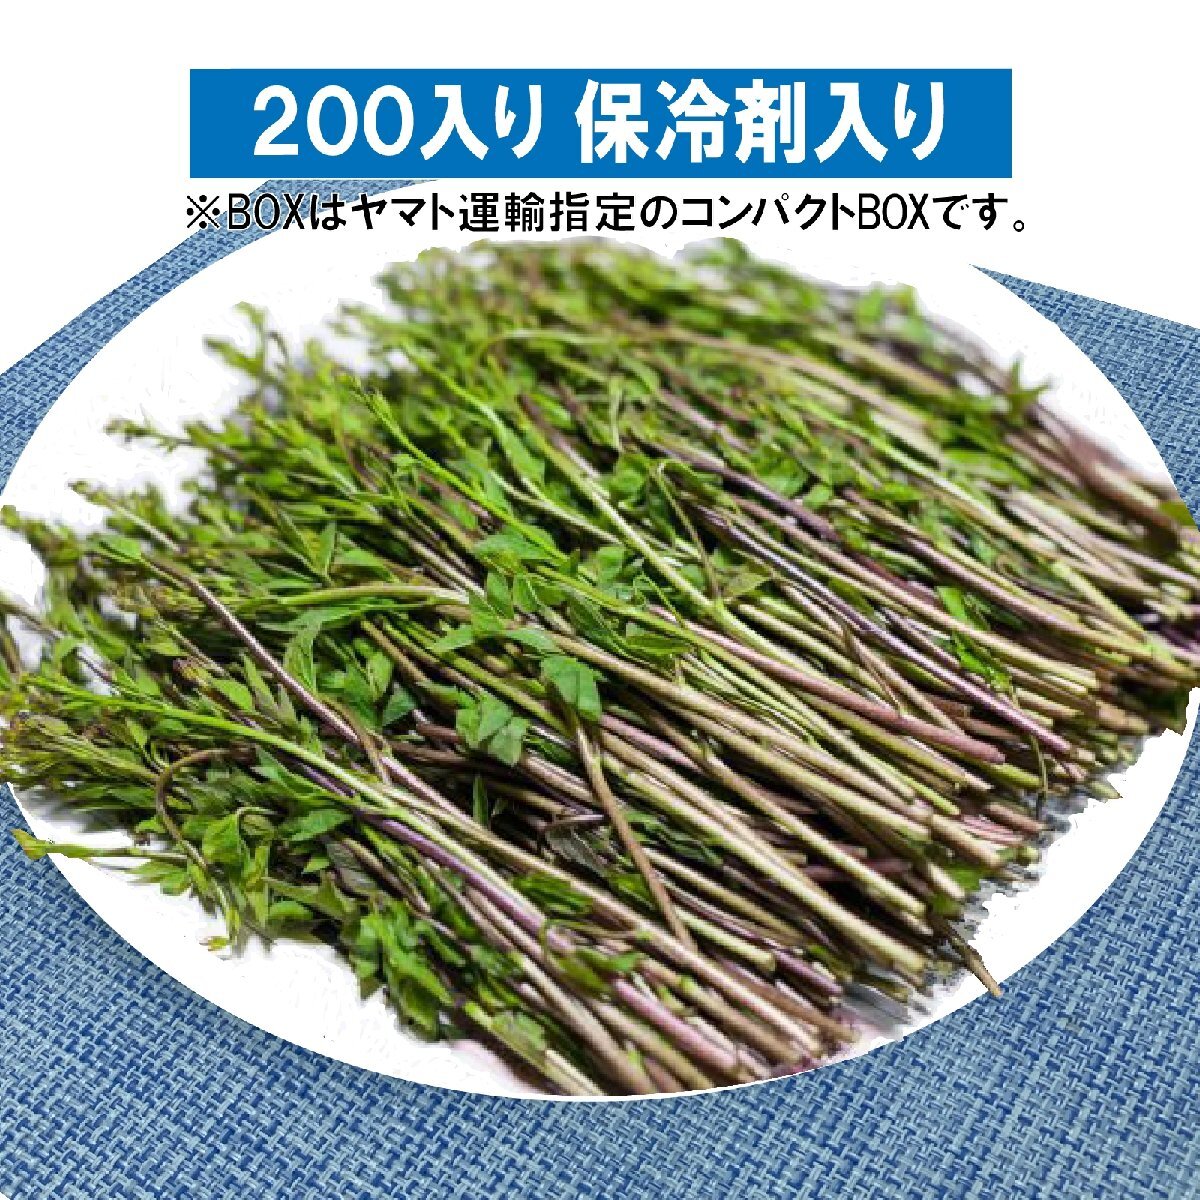 [ early stage reservation . limit 100 jpy discount ][ cooling agent entering ]. snow zone. .. seems to be edible wild plants akebi. new .[ tree. .] approximately 200g/ Niigata . is high class break up . food ingredients 